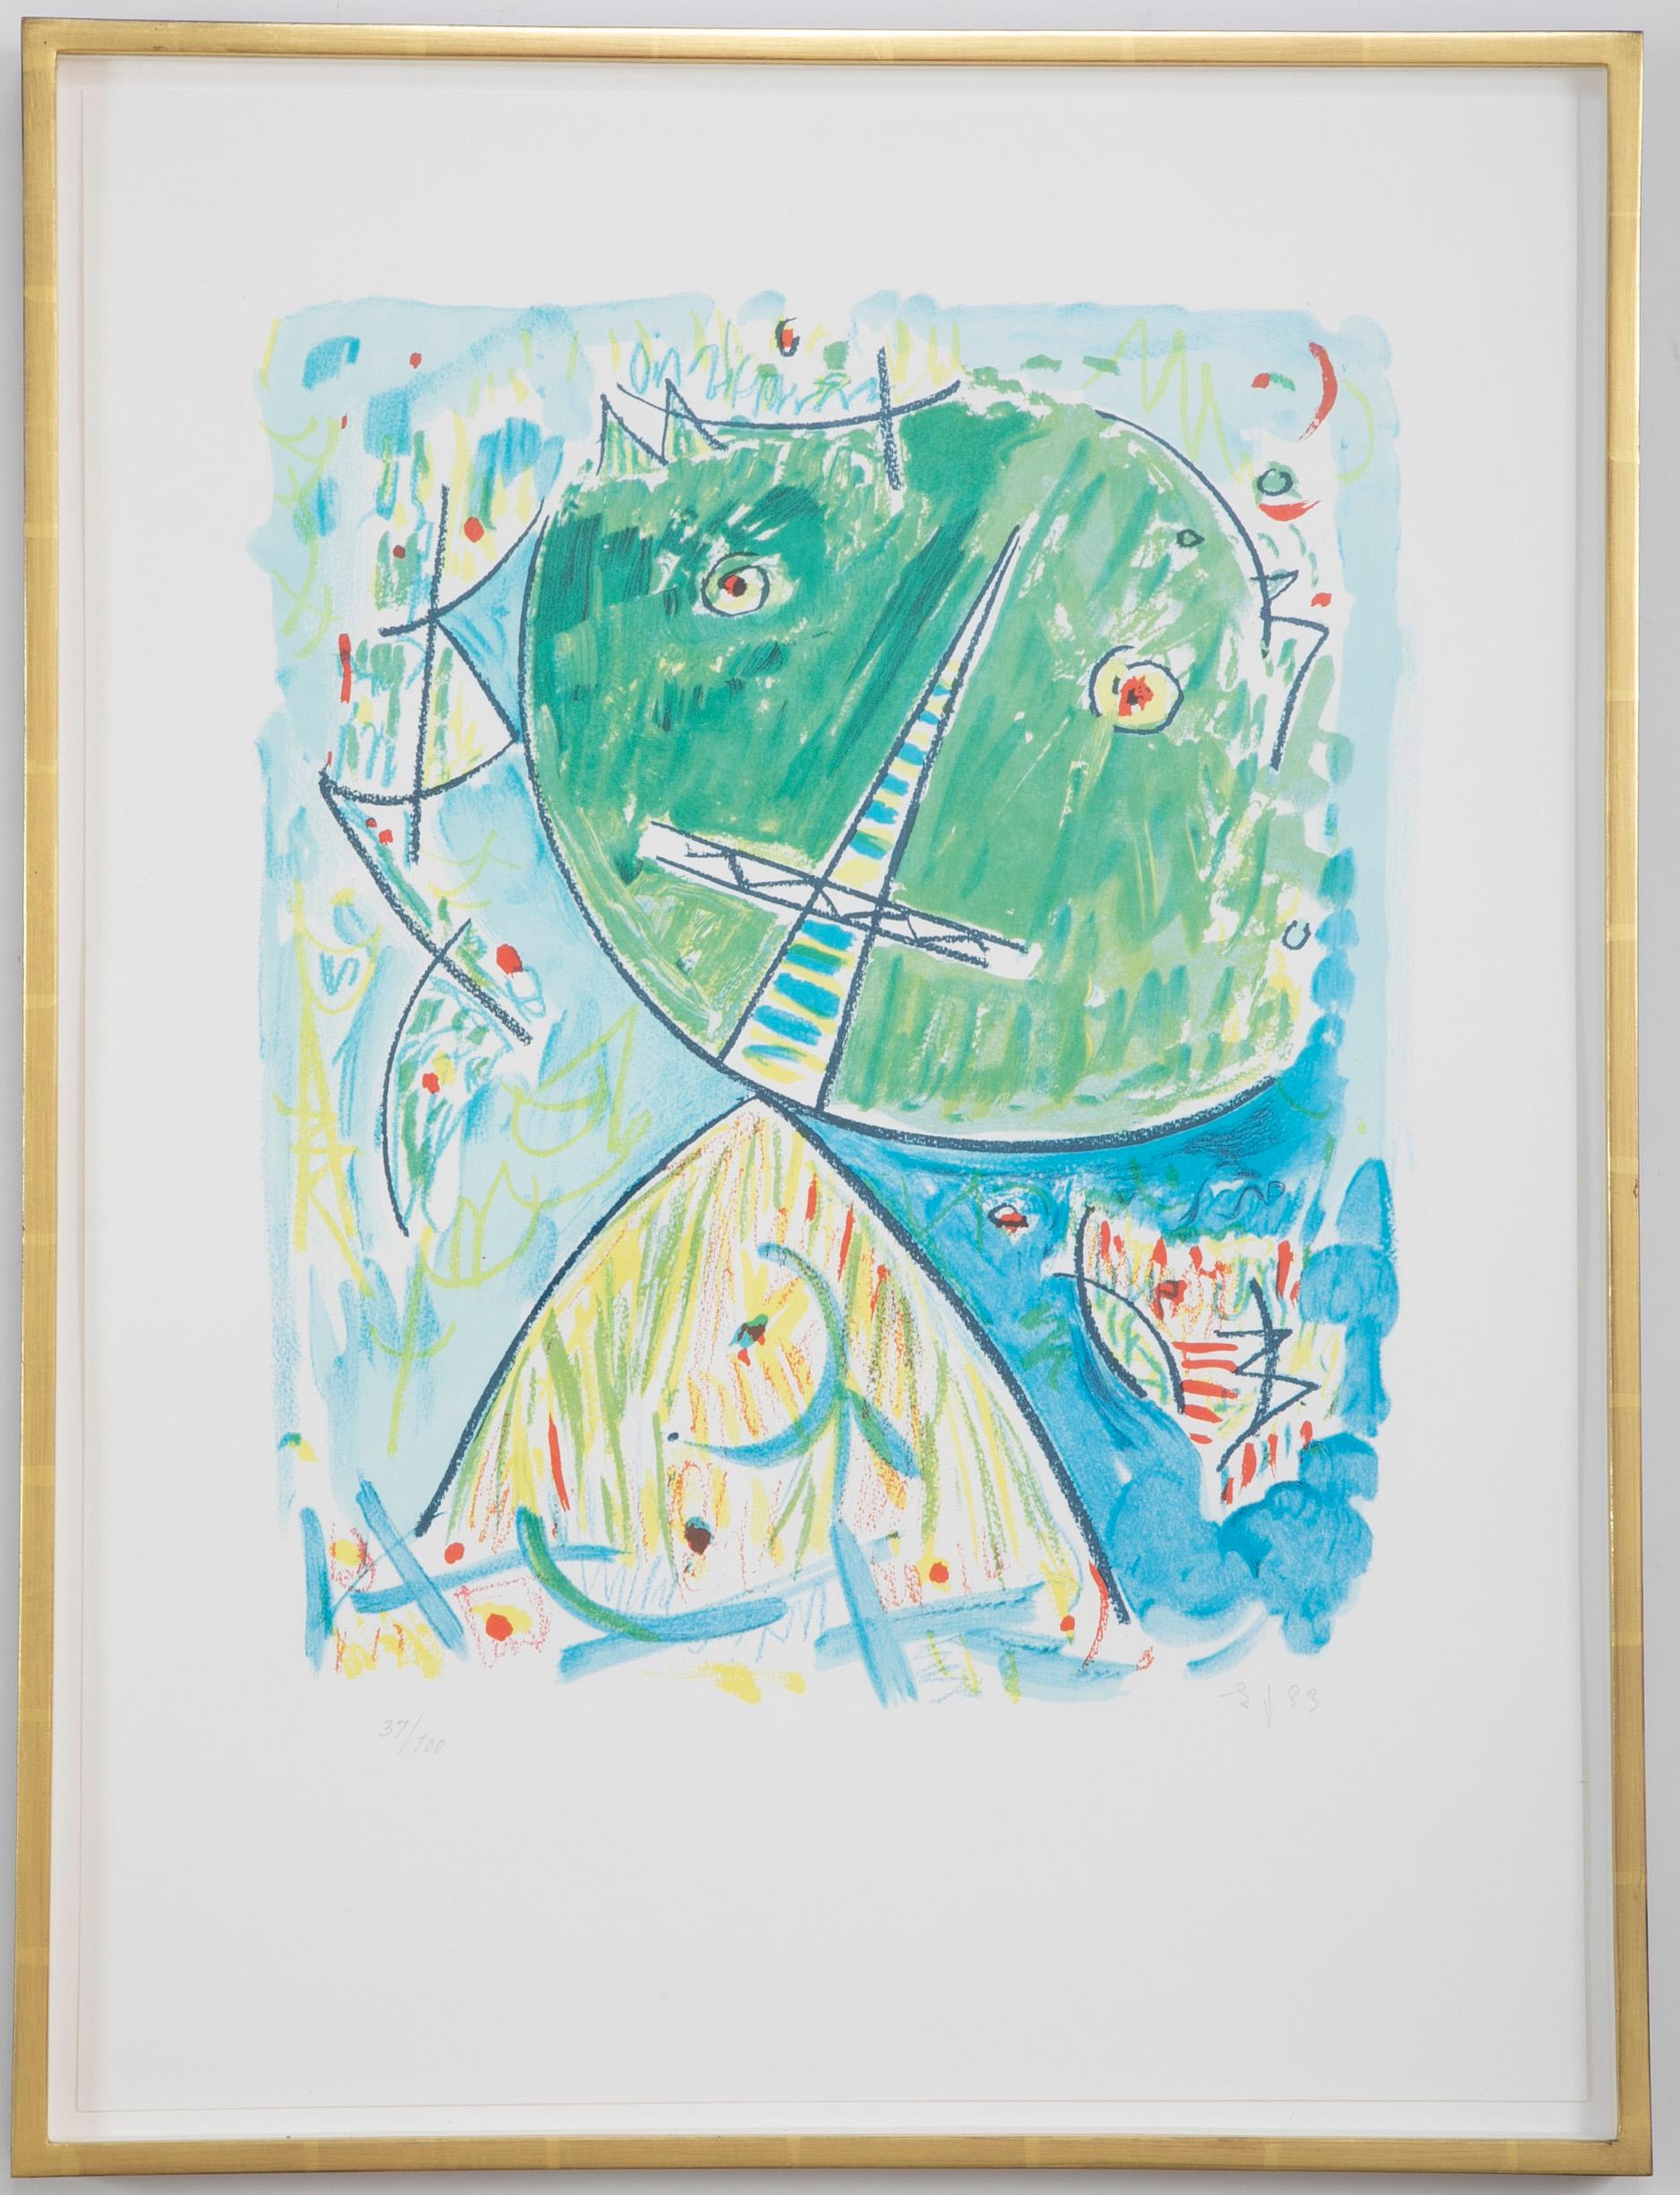 Lithograph in colors: Composition 37/100 by Egill Jacobsen ( Danish. 1910-1998 ). Signed EJ . 83, 37/100. Sheet size : 26.38